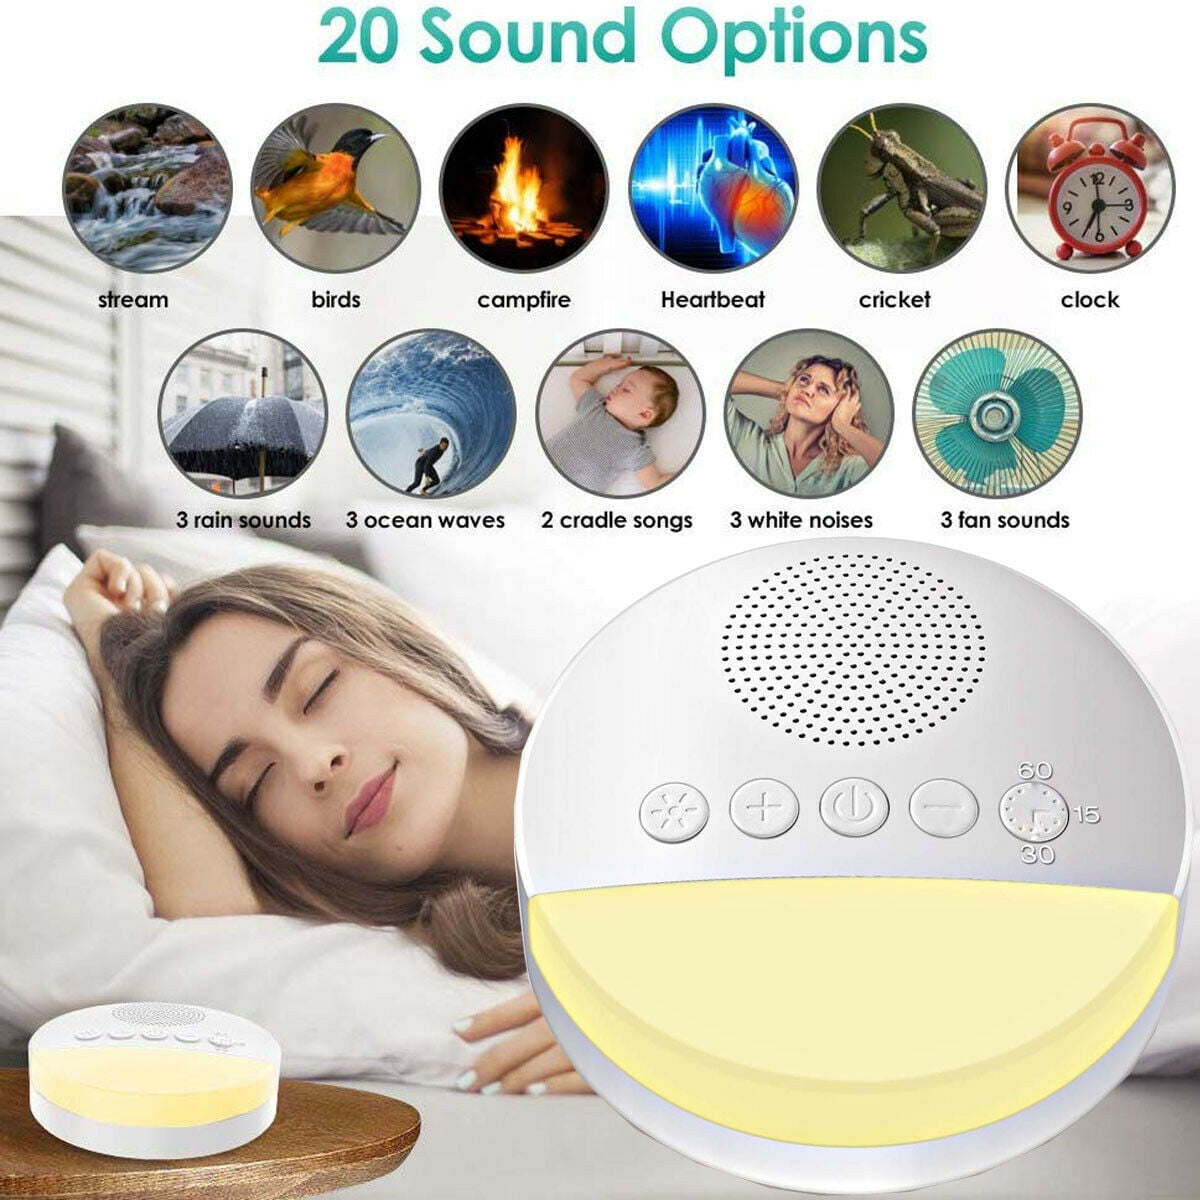 Sleep Sound Machine for Baby Kid Adult Home Hotel Traveling Office White Noise Machine with 22 Soothing Sounds Night Light Sleep Timer for Sleeping & Relaxation 